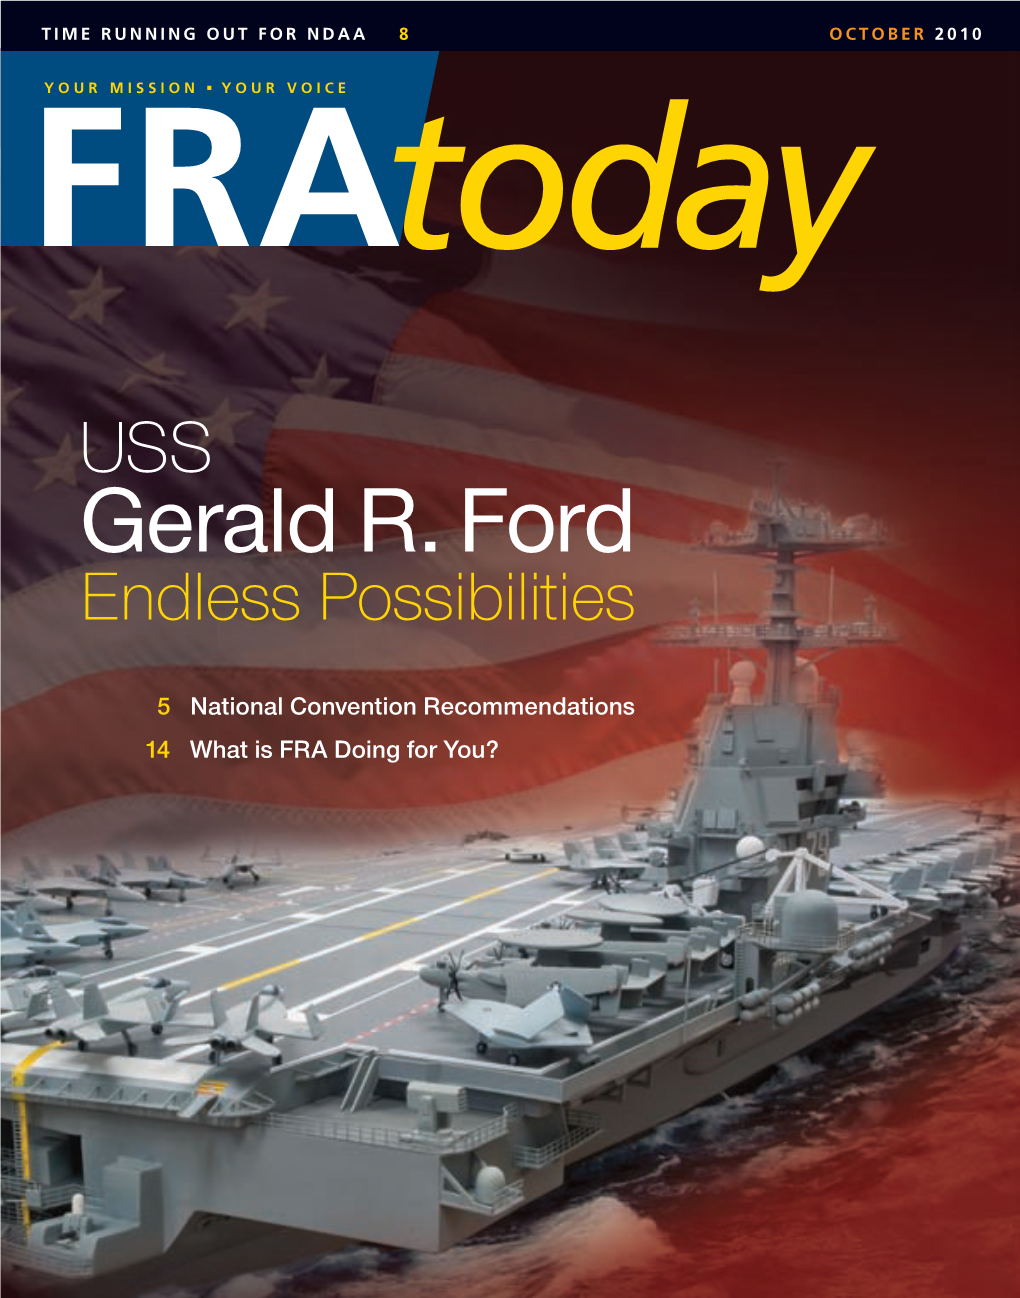 USS Gerald R. Ford Endless Possibilities